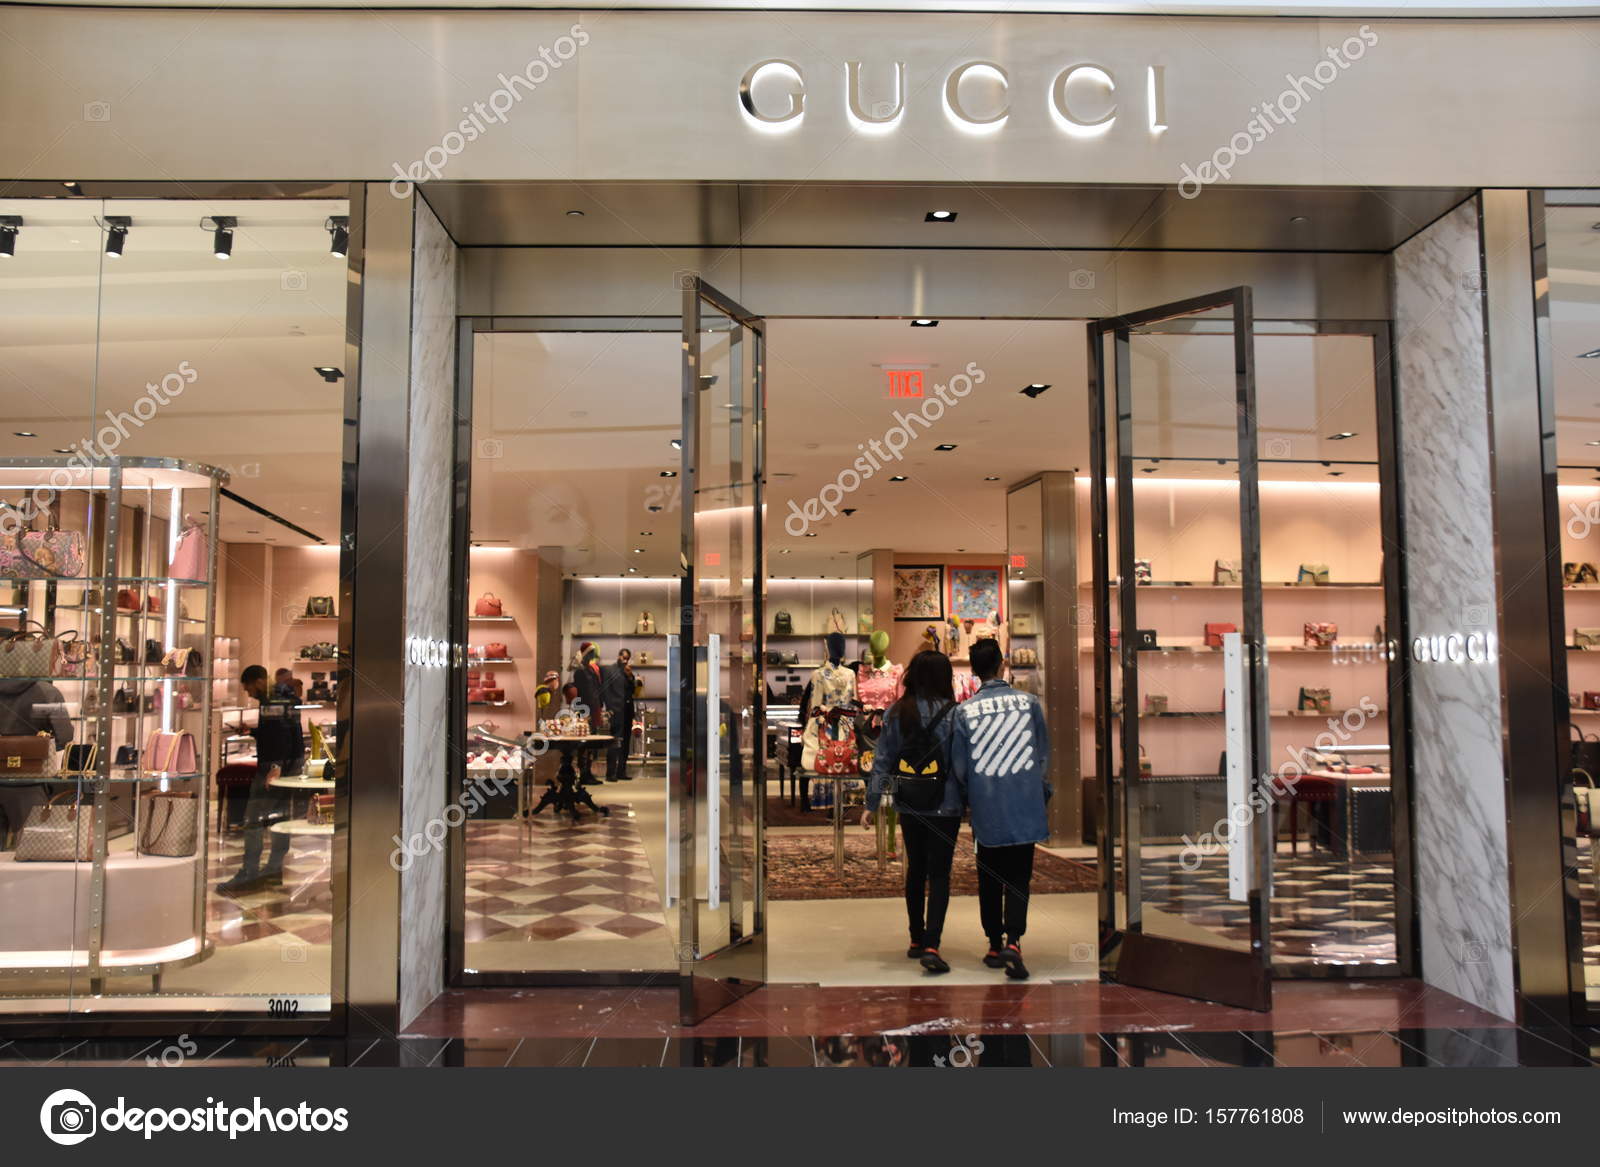 Gucci store at King of Prussia Mall in 